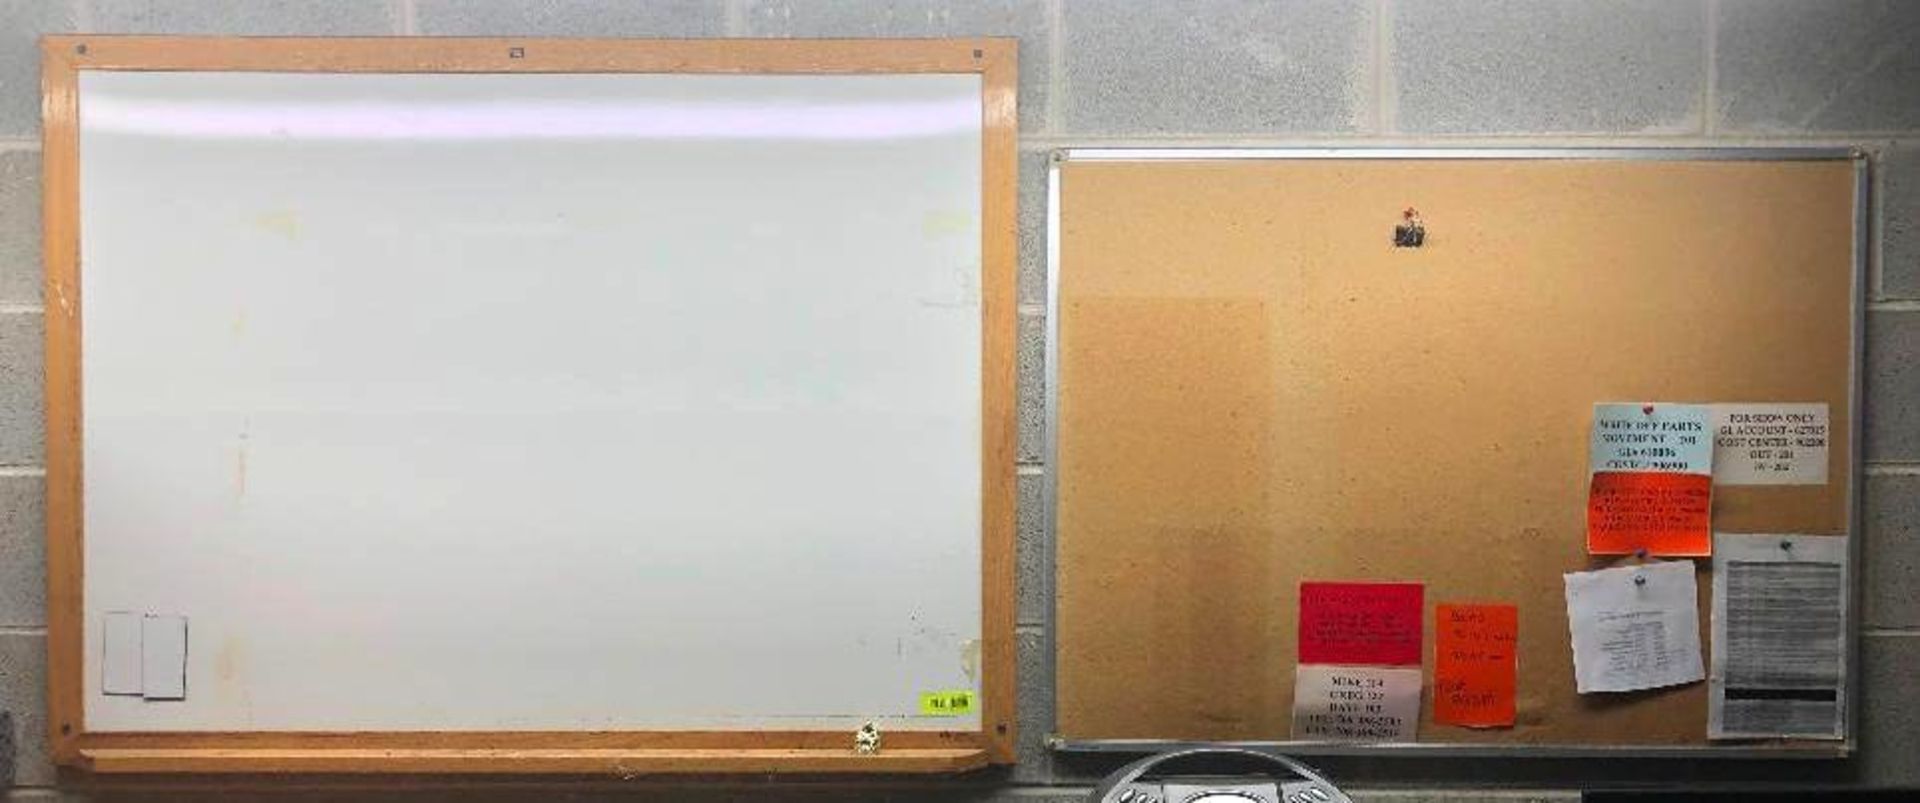 DESCRIPTION: VARIOUS SIZED WHITE BOARD & BULLETIN BOARD LOCATION: SHIPPING BAY QTY: 1